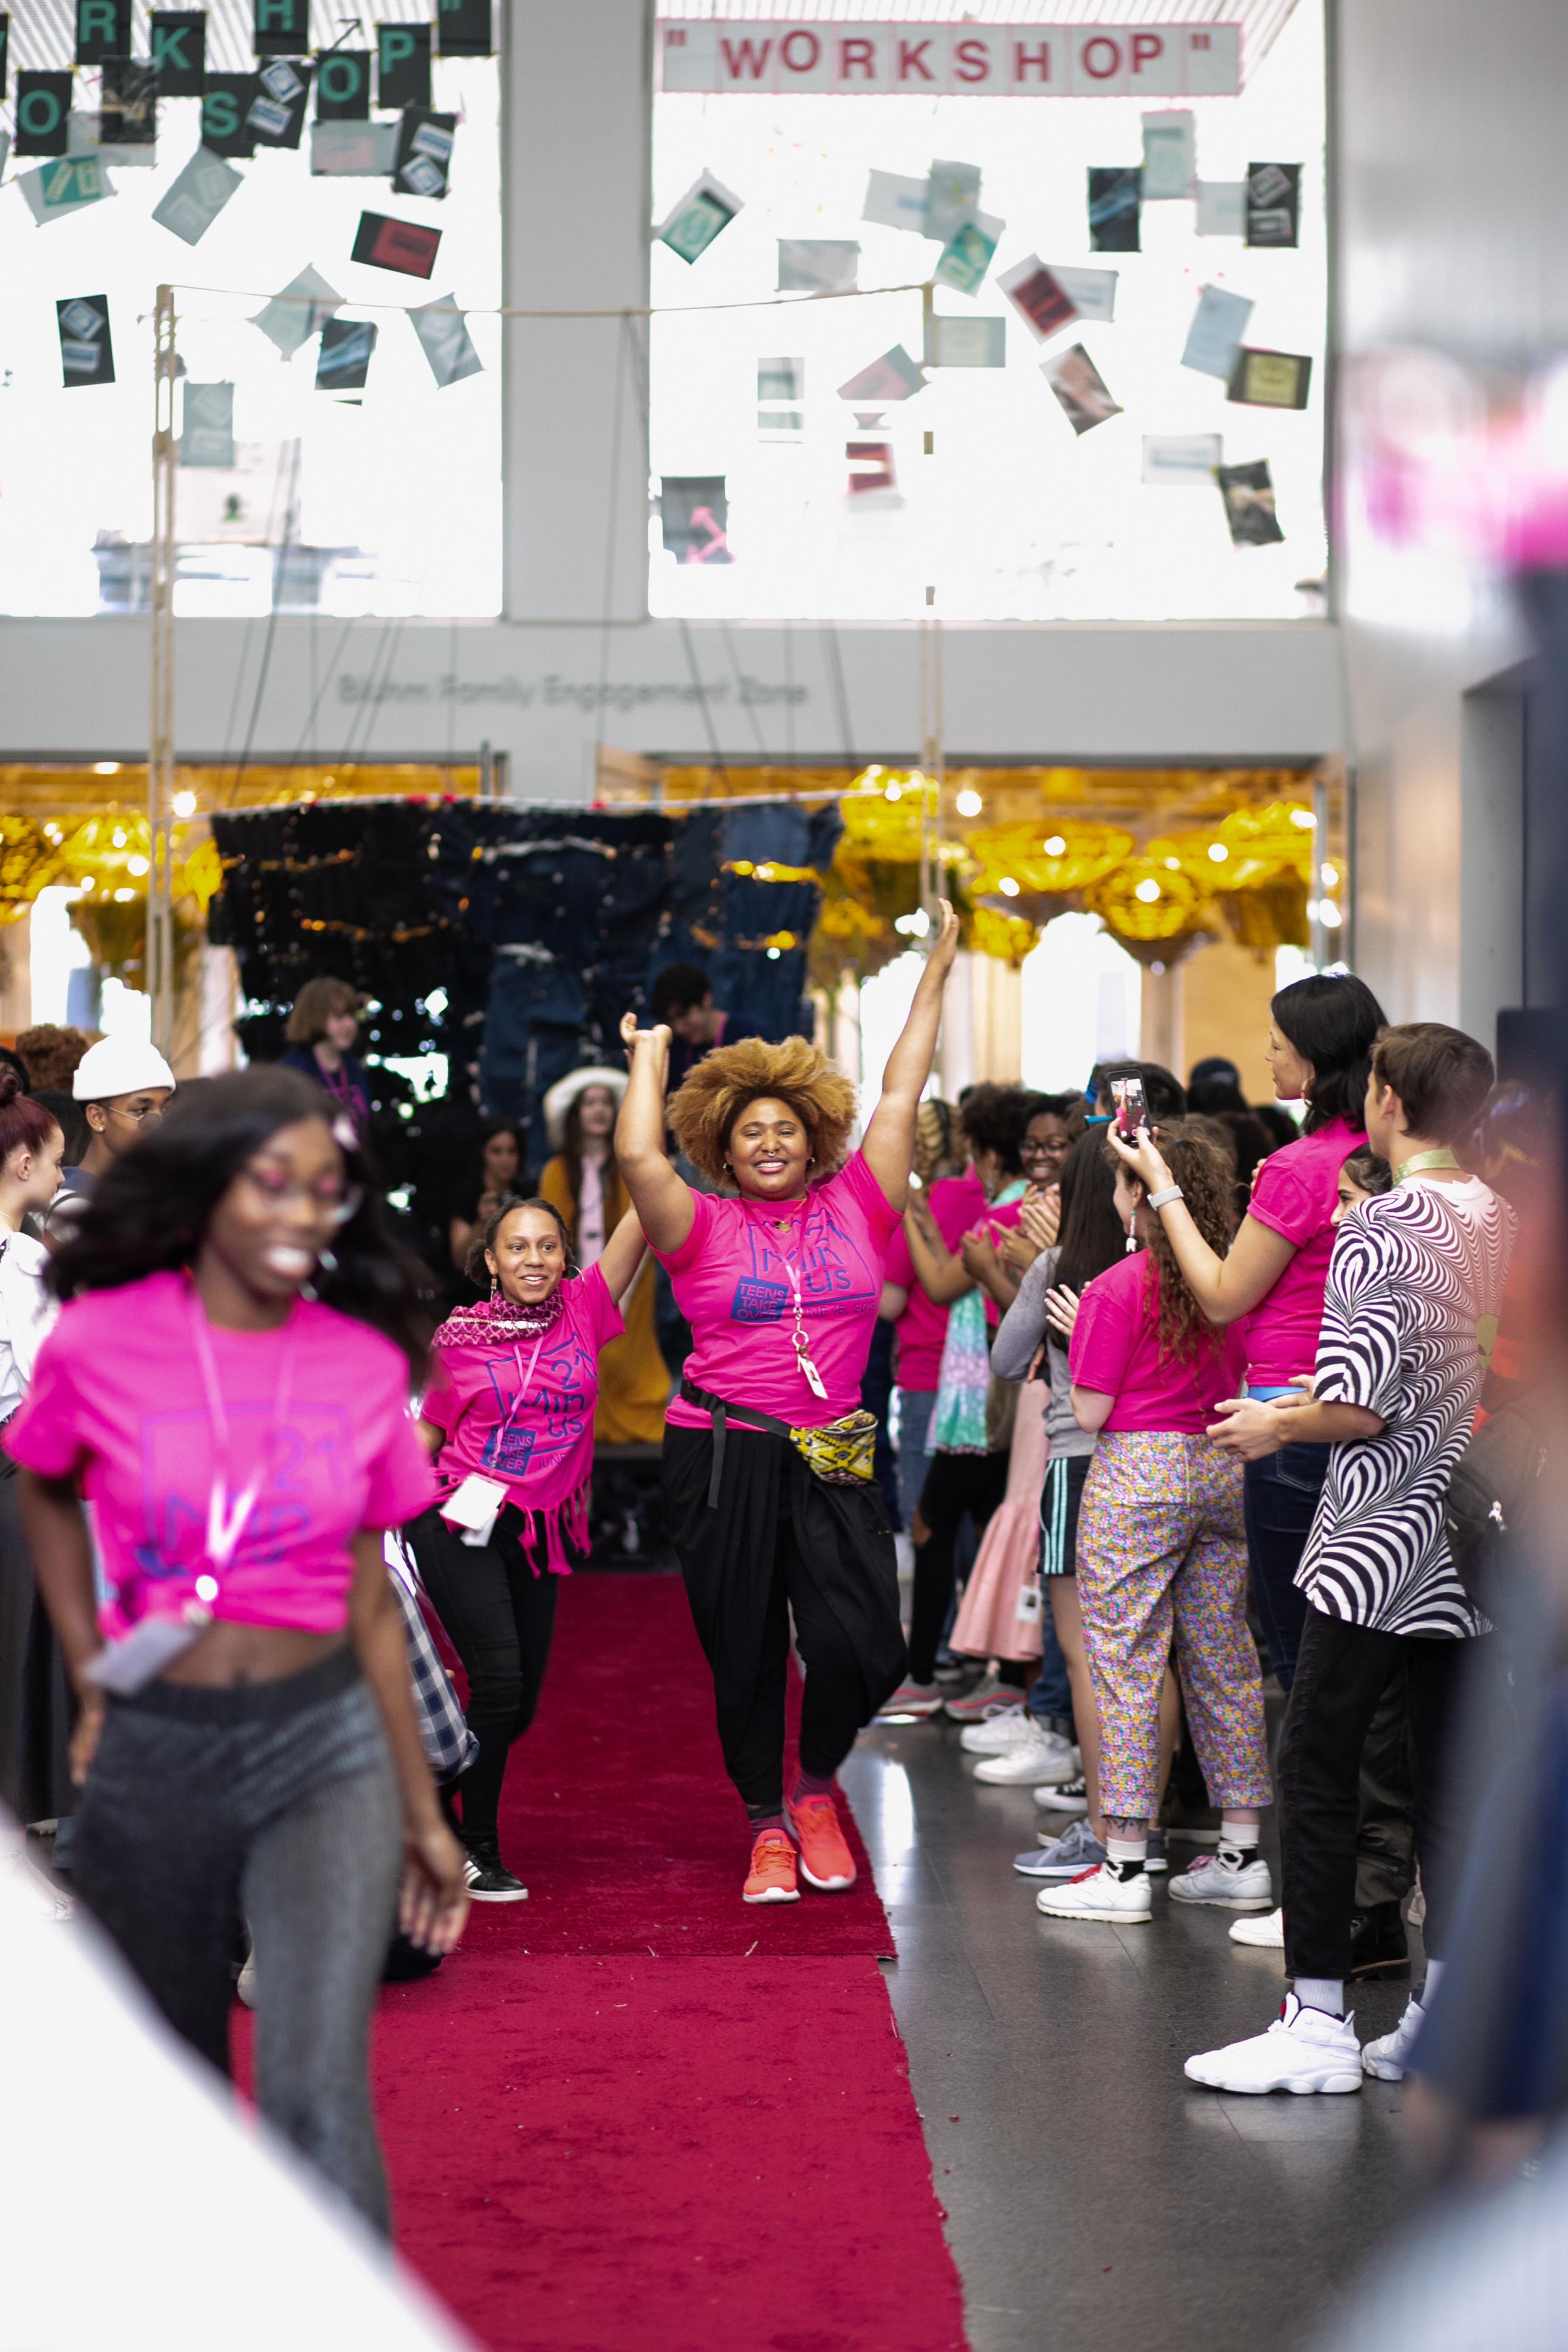 Young people in bright pink t-shirts walk jubilantly down a red carpet as onlookers watch and applaud.